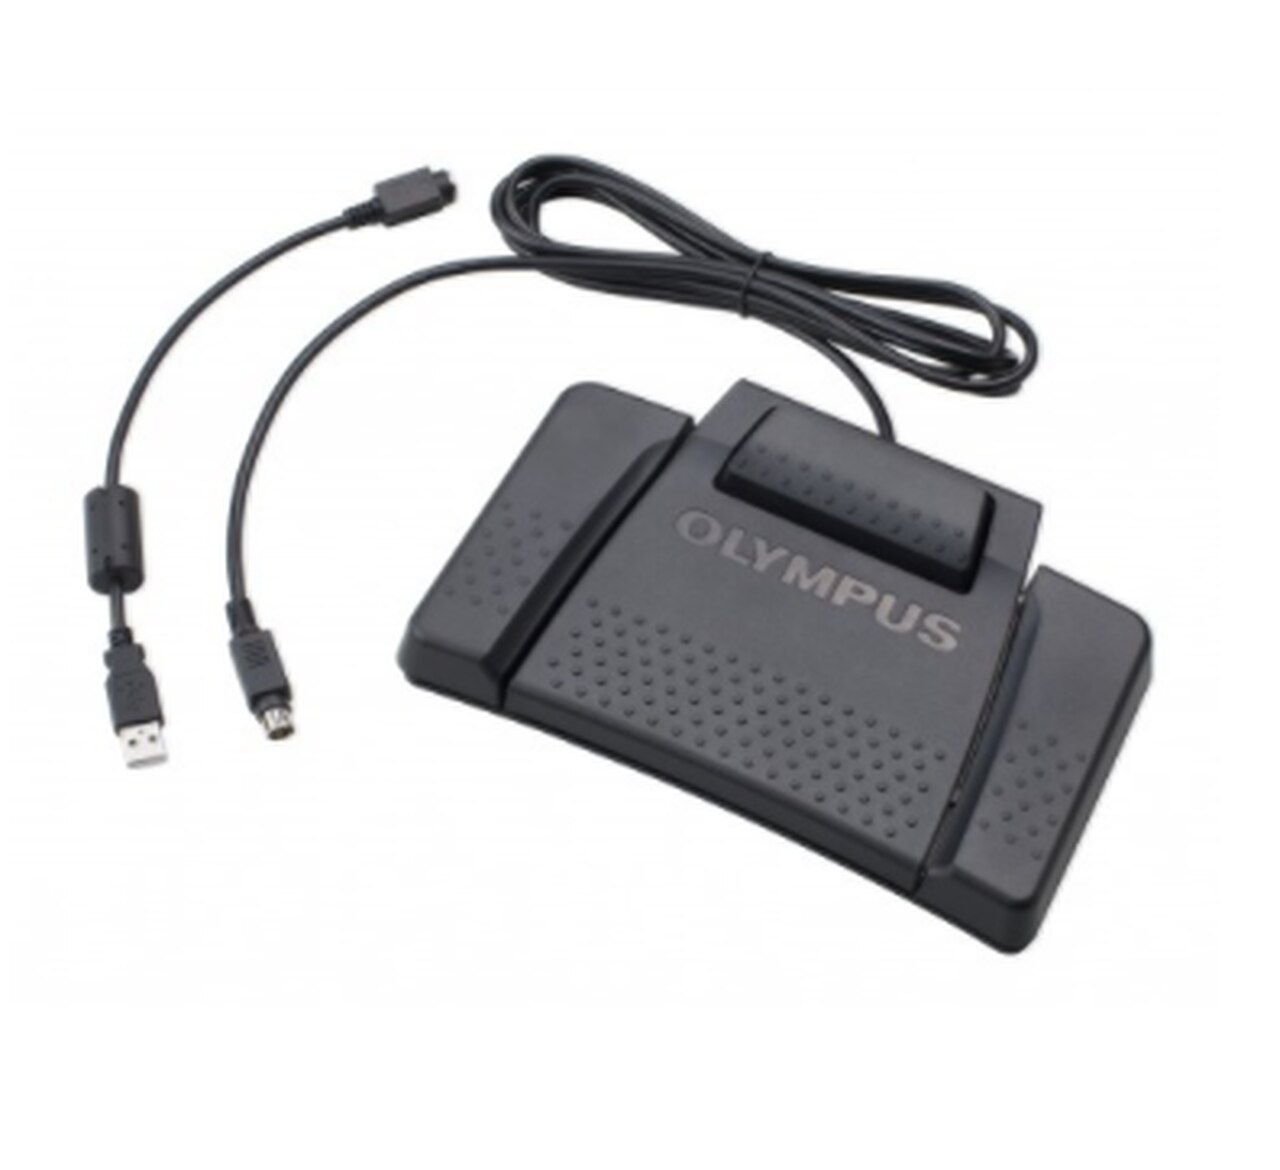 Wiimote hid driver for mac